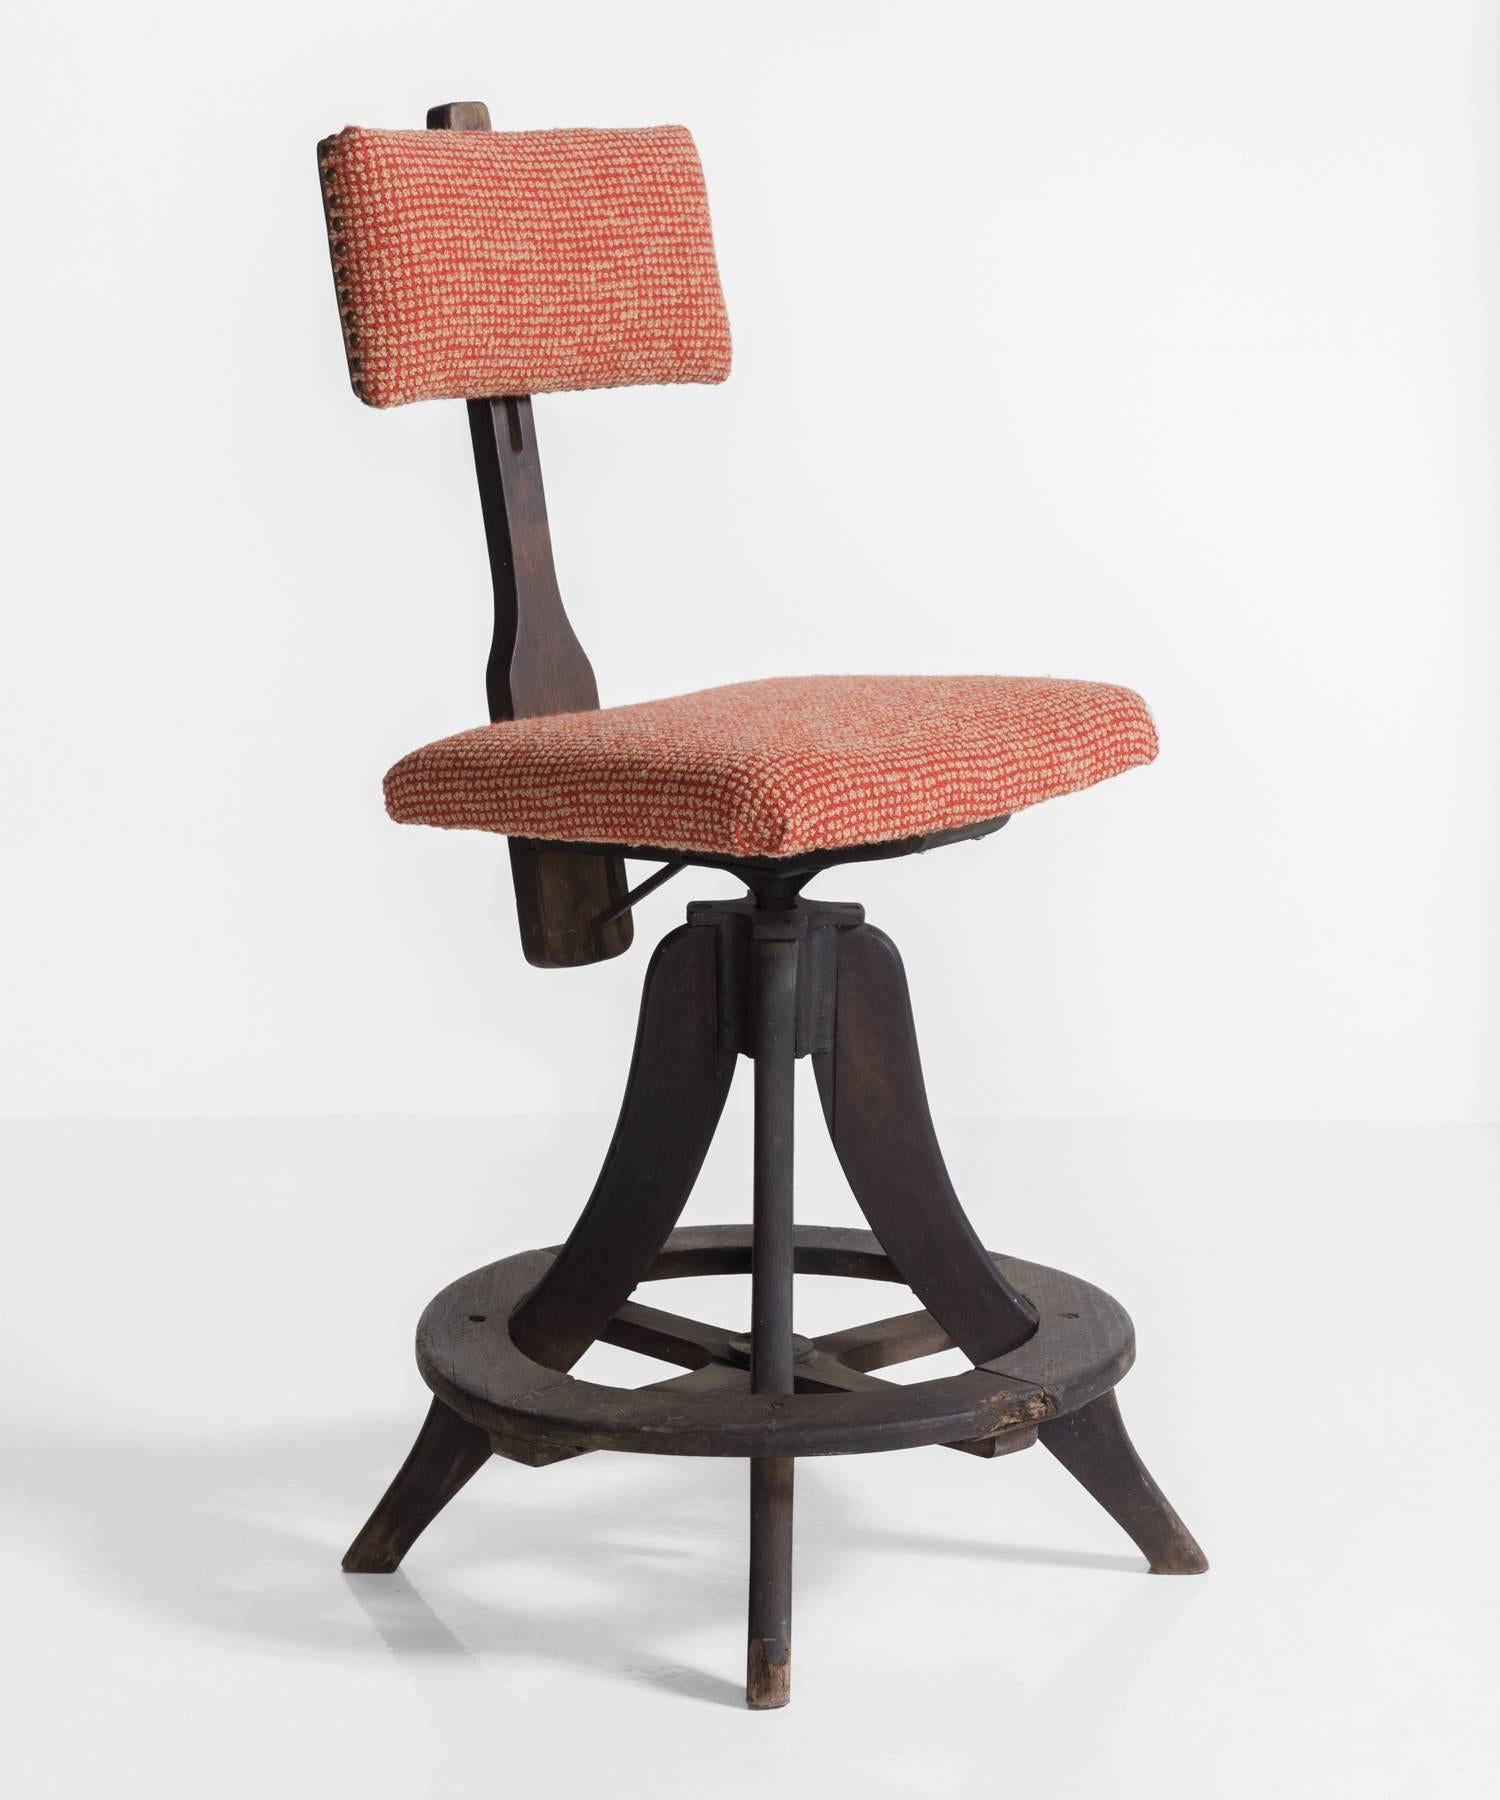 Industrial Upholstered Painters Stool, England, circa 1940

Backrest and seat height are both adjustable, and newly upholstered in Maharam fabric.